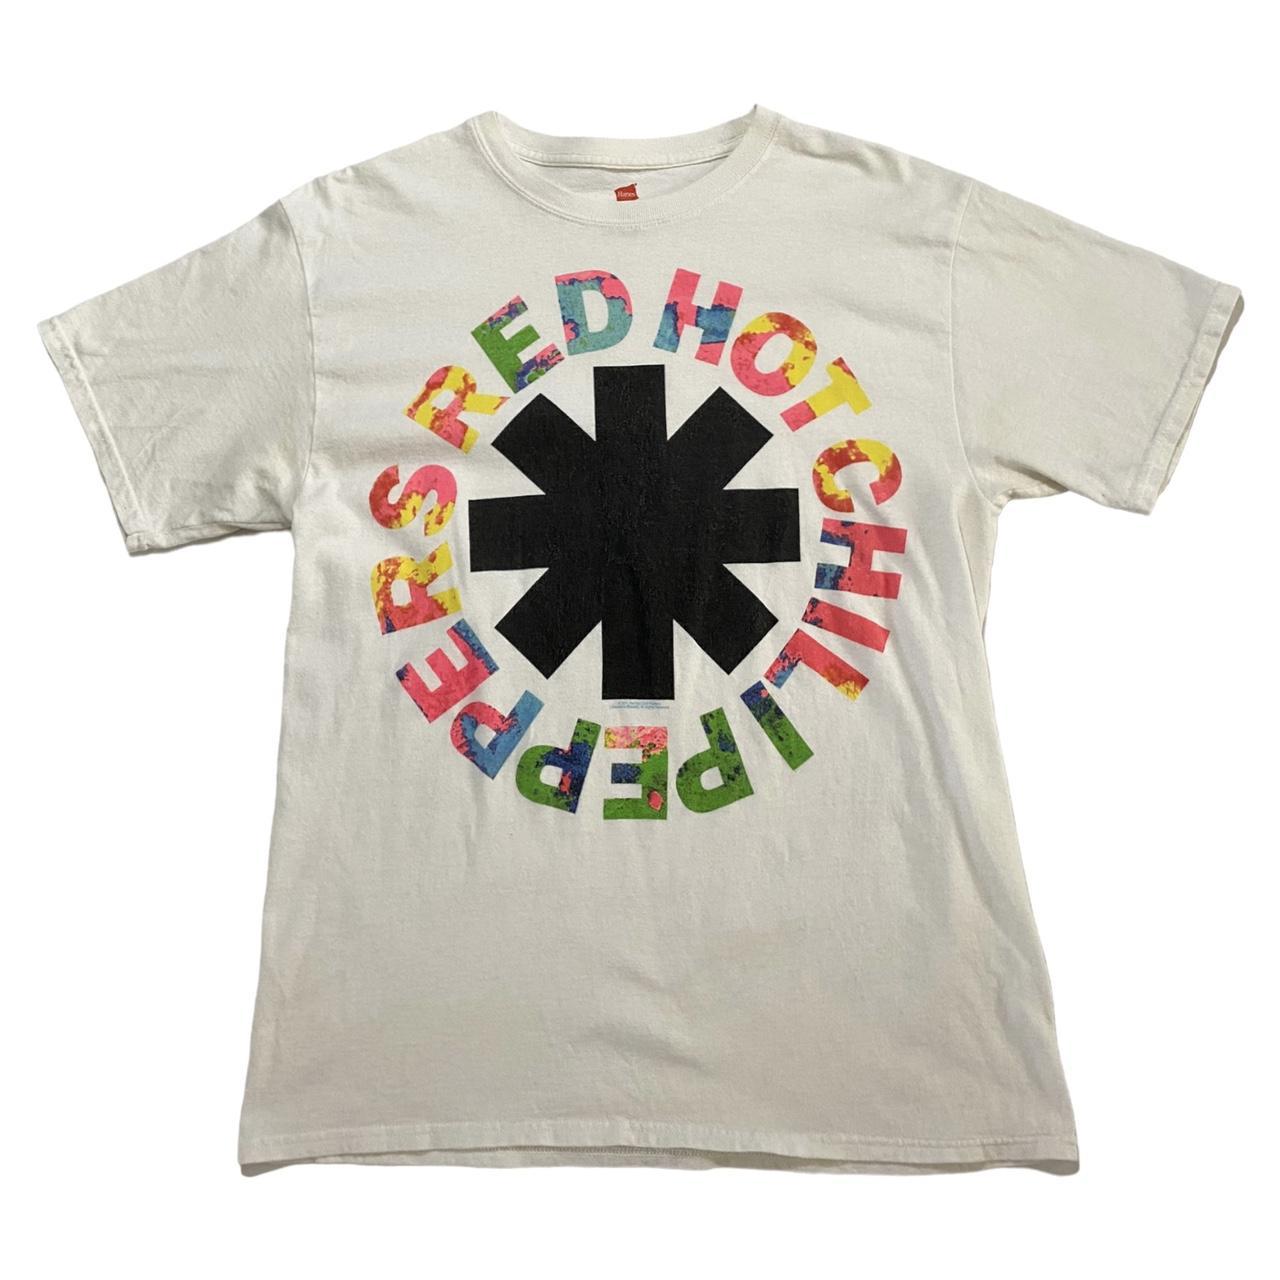 Red Hot Chili Peppers Band Tshirt 2011 M, Officially...